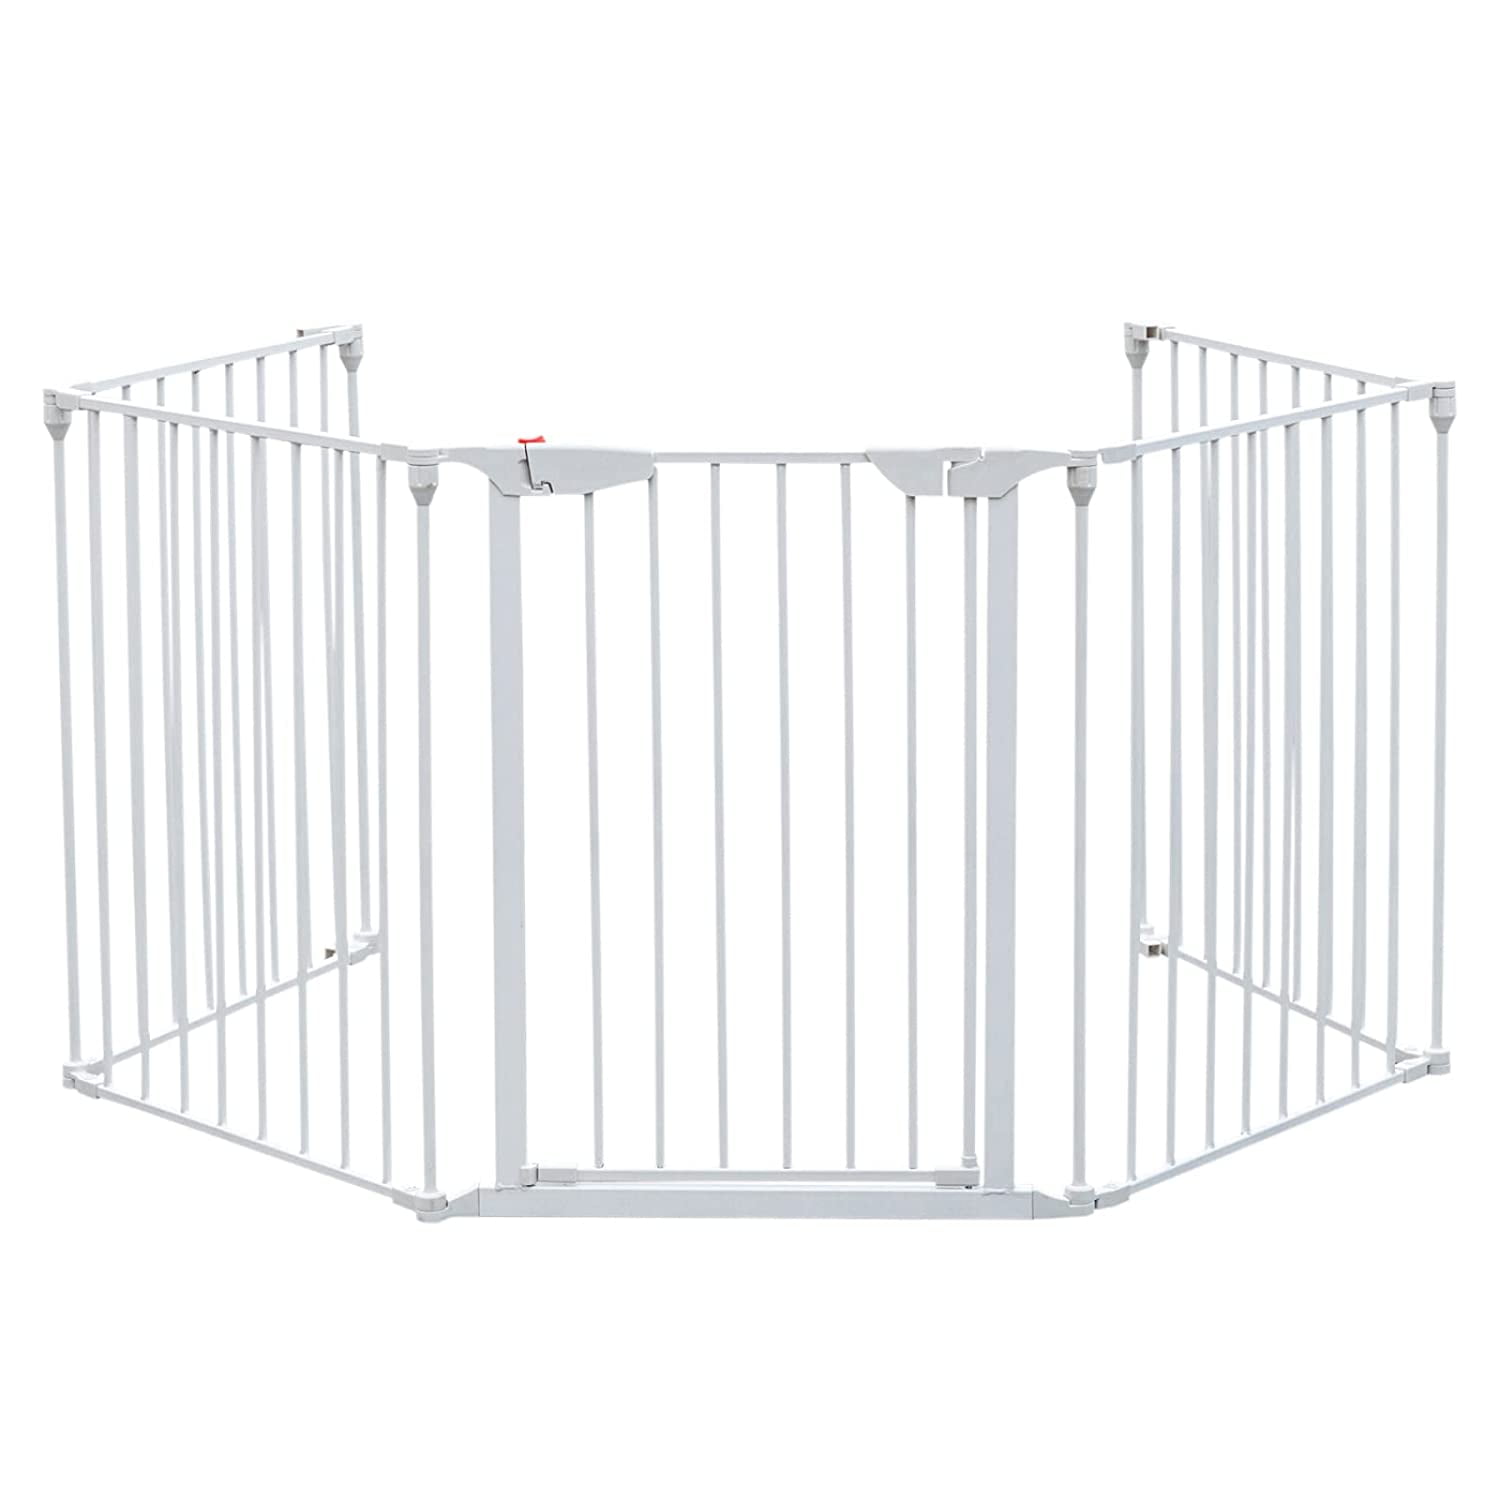 29” Metal Woodstove & Fireplace Safety Gate Guard